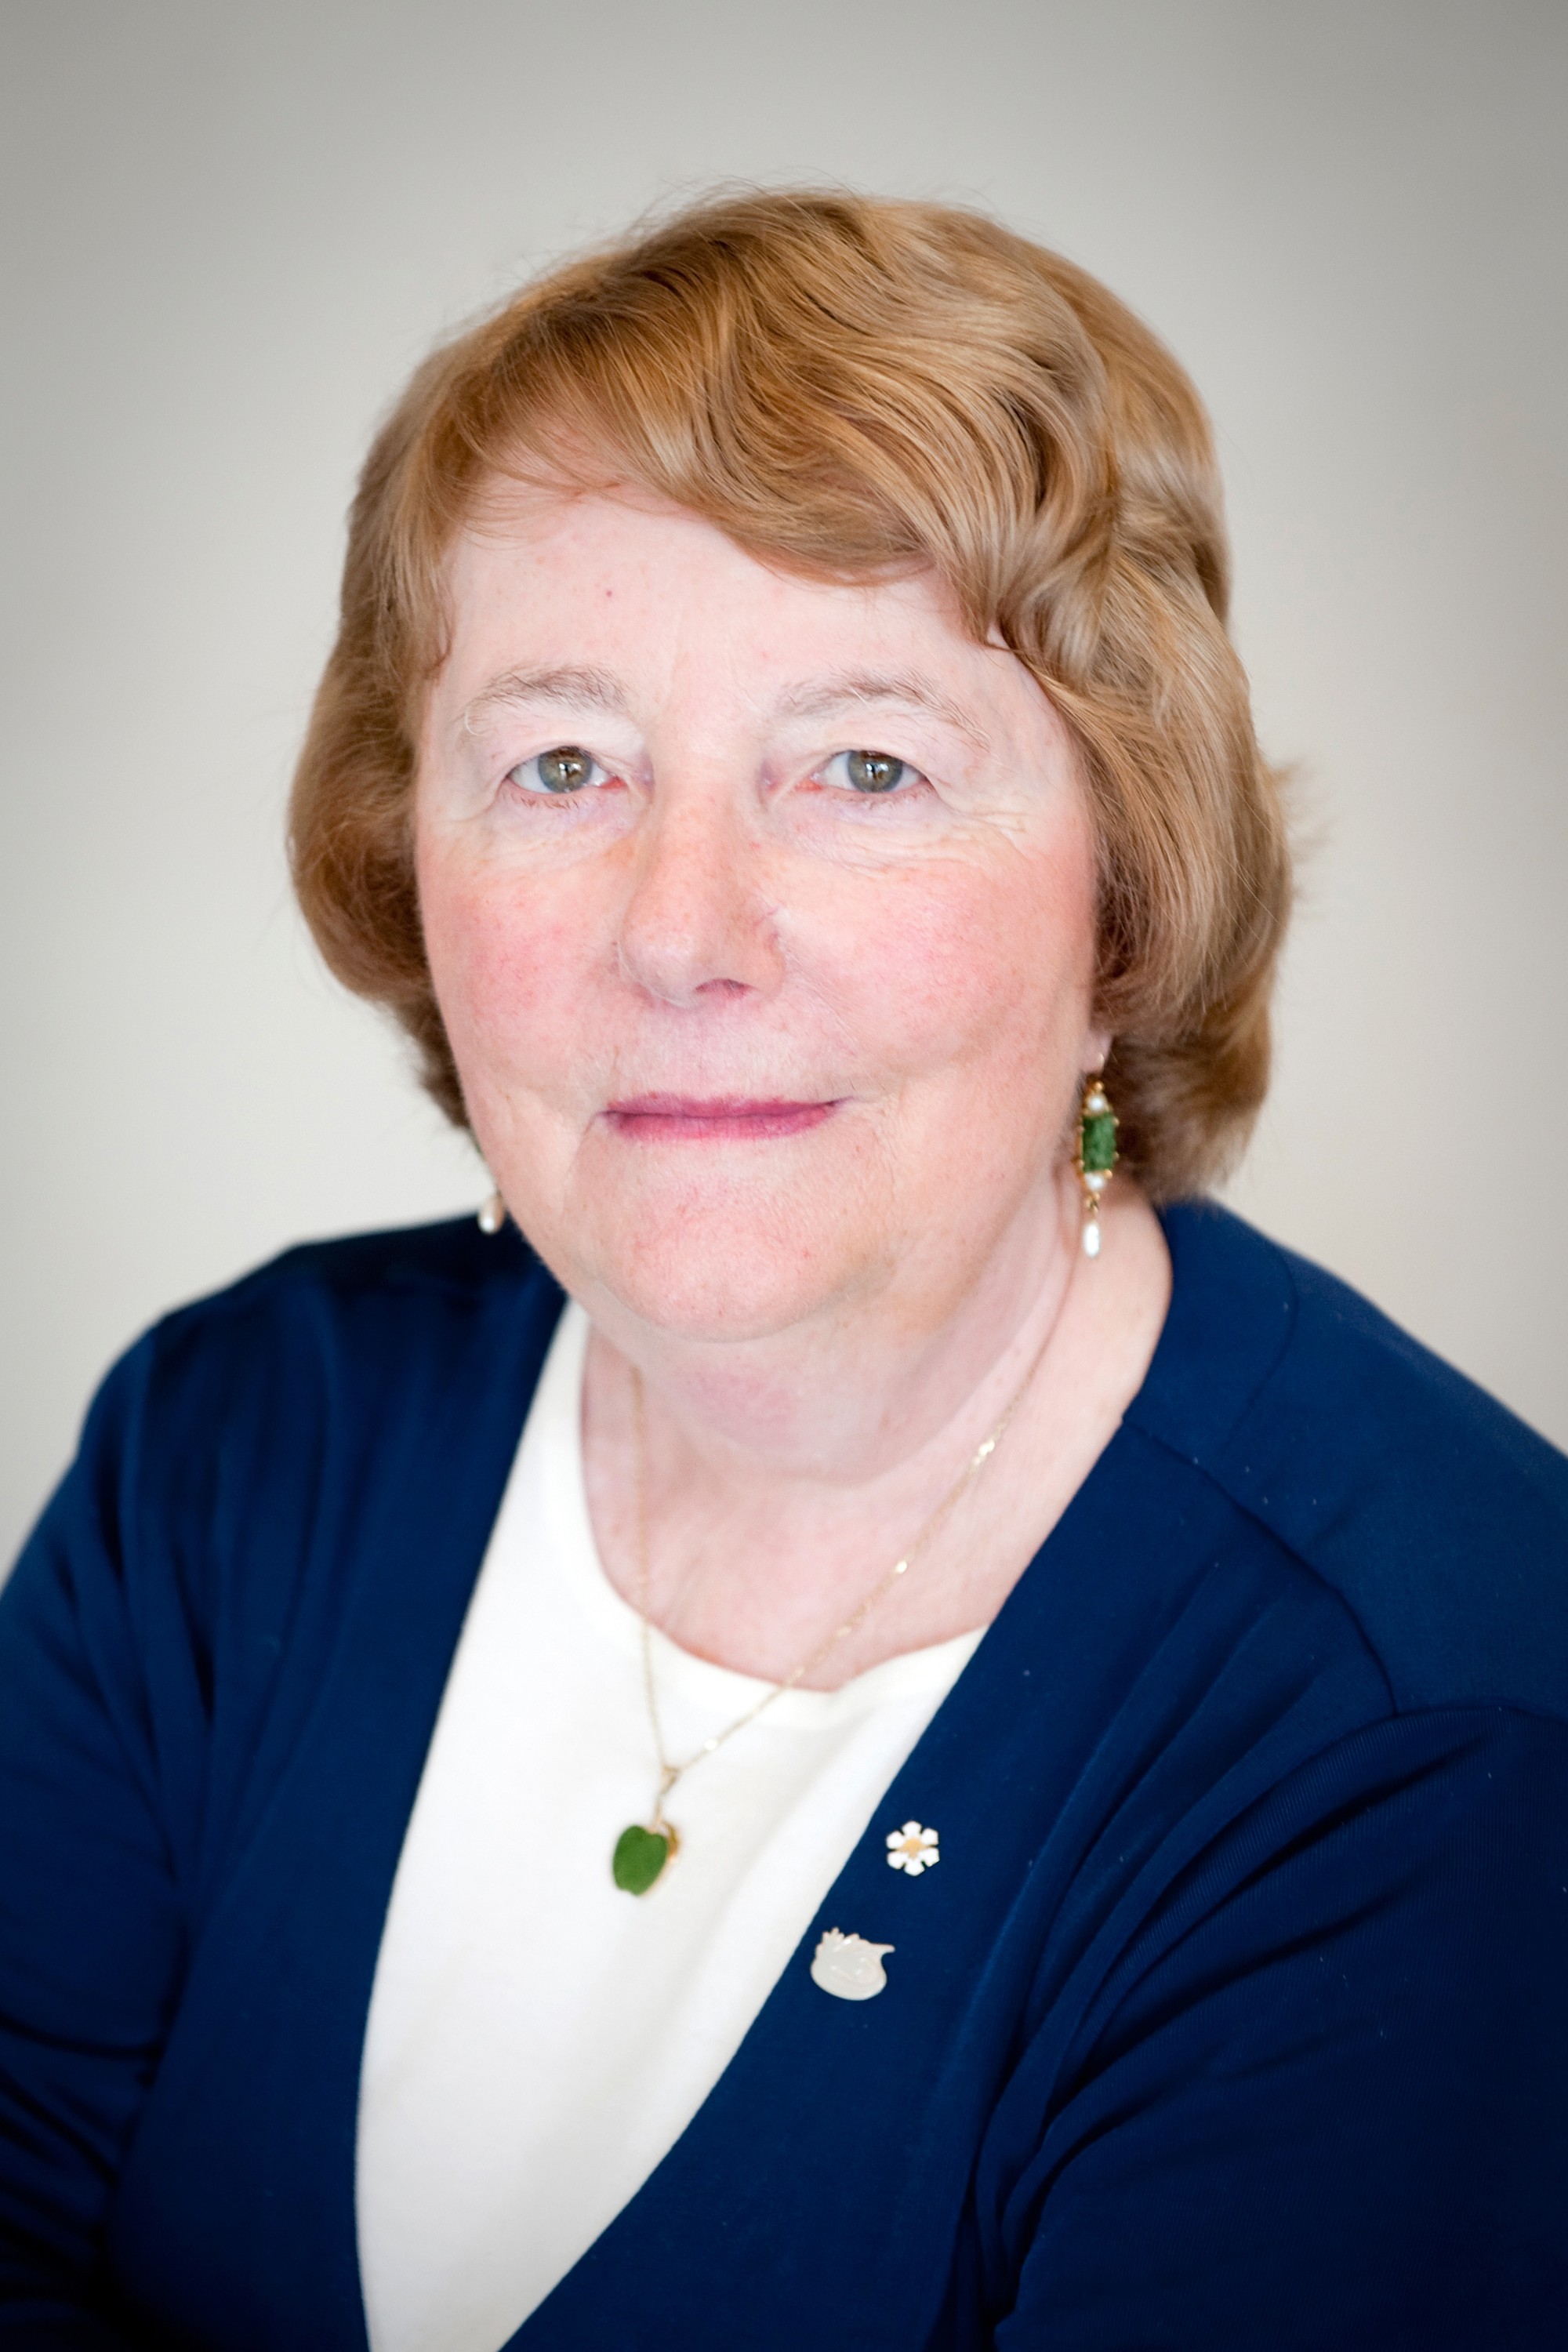 Headshot of Professor Monique Frize against a beige background. She is wearing a navy cardigan and a necklace with a pendant.